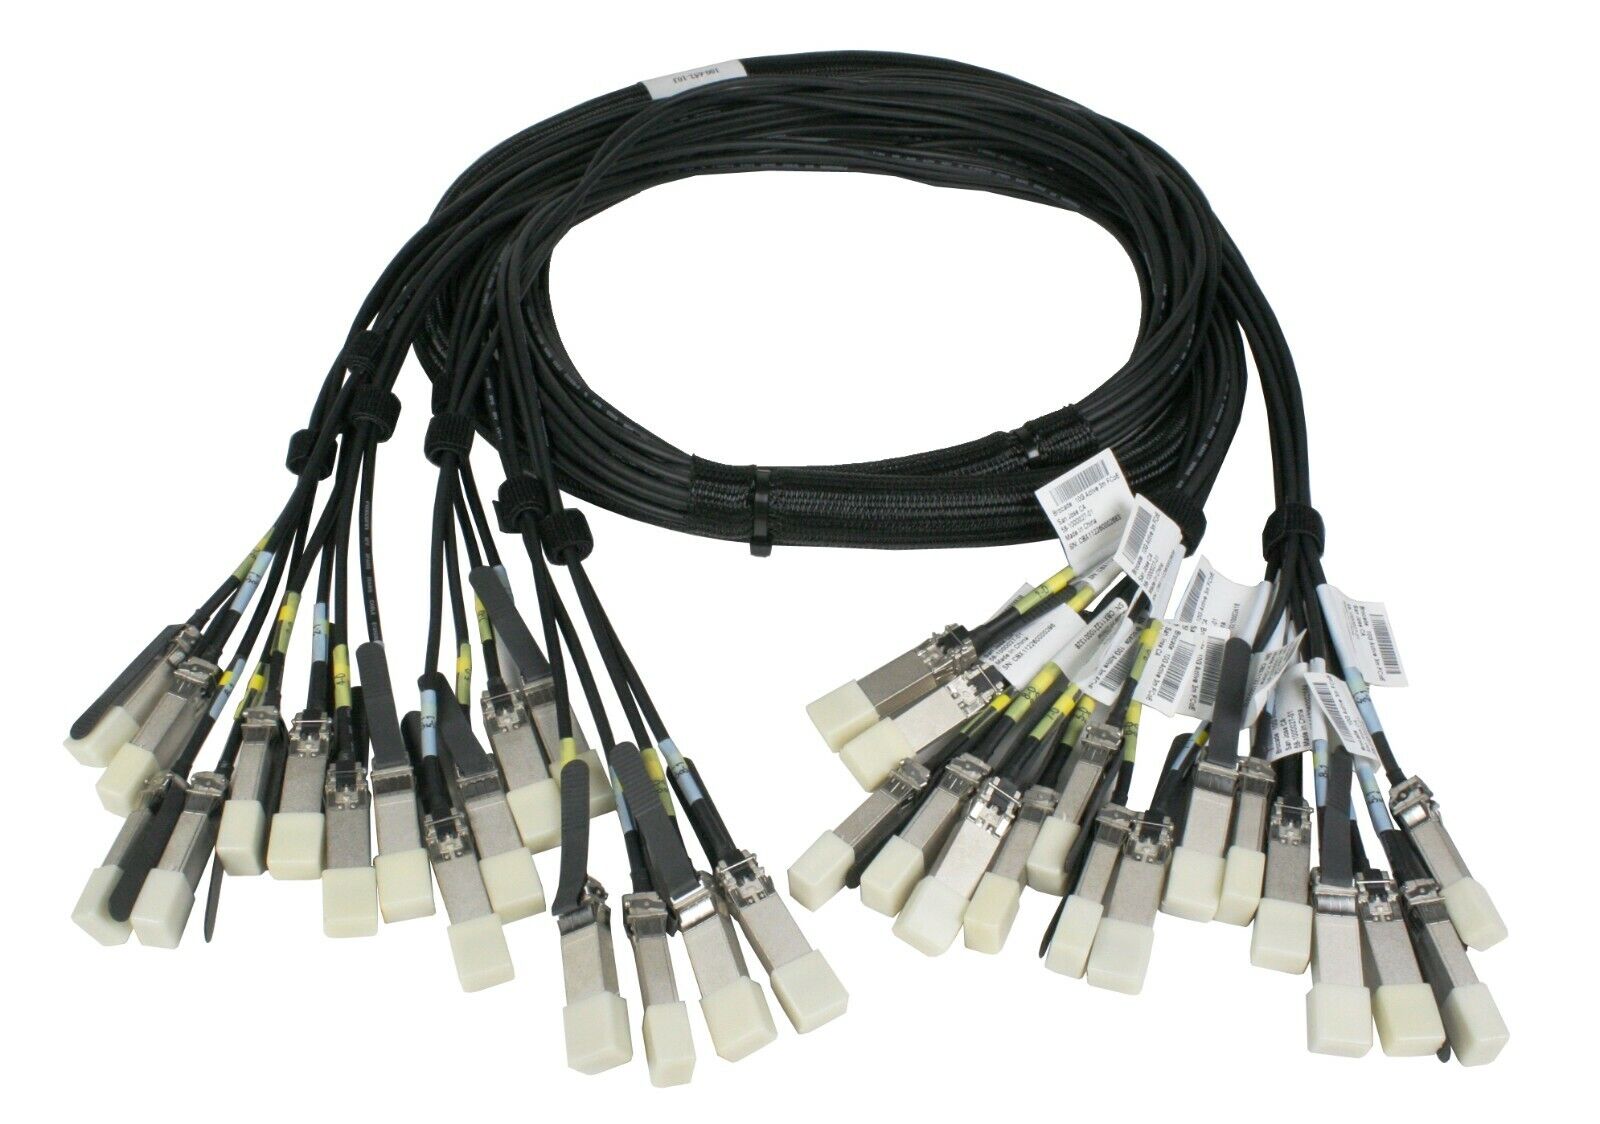 Bundle 16 Brocade 10G Active FCoE SFP+ Cables 100-652-104 3M 3 meter 9.8Ft #9-16